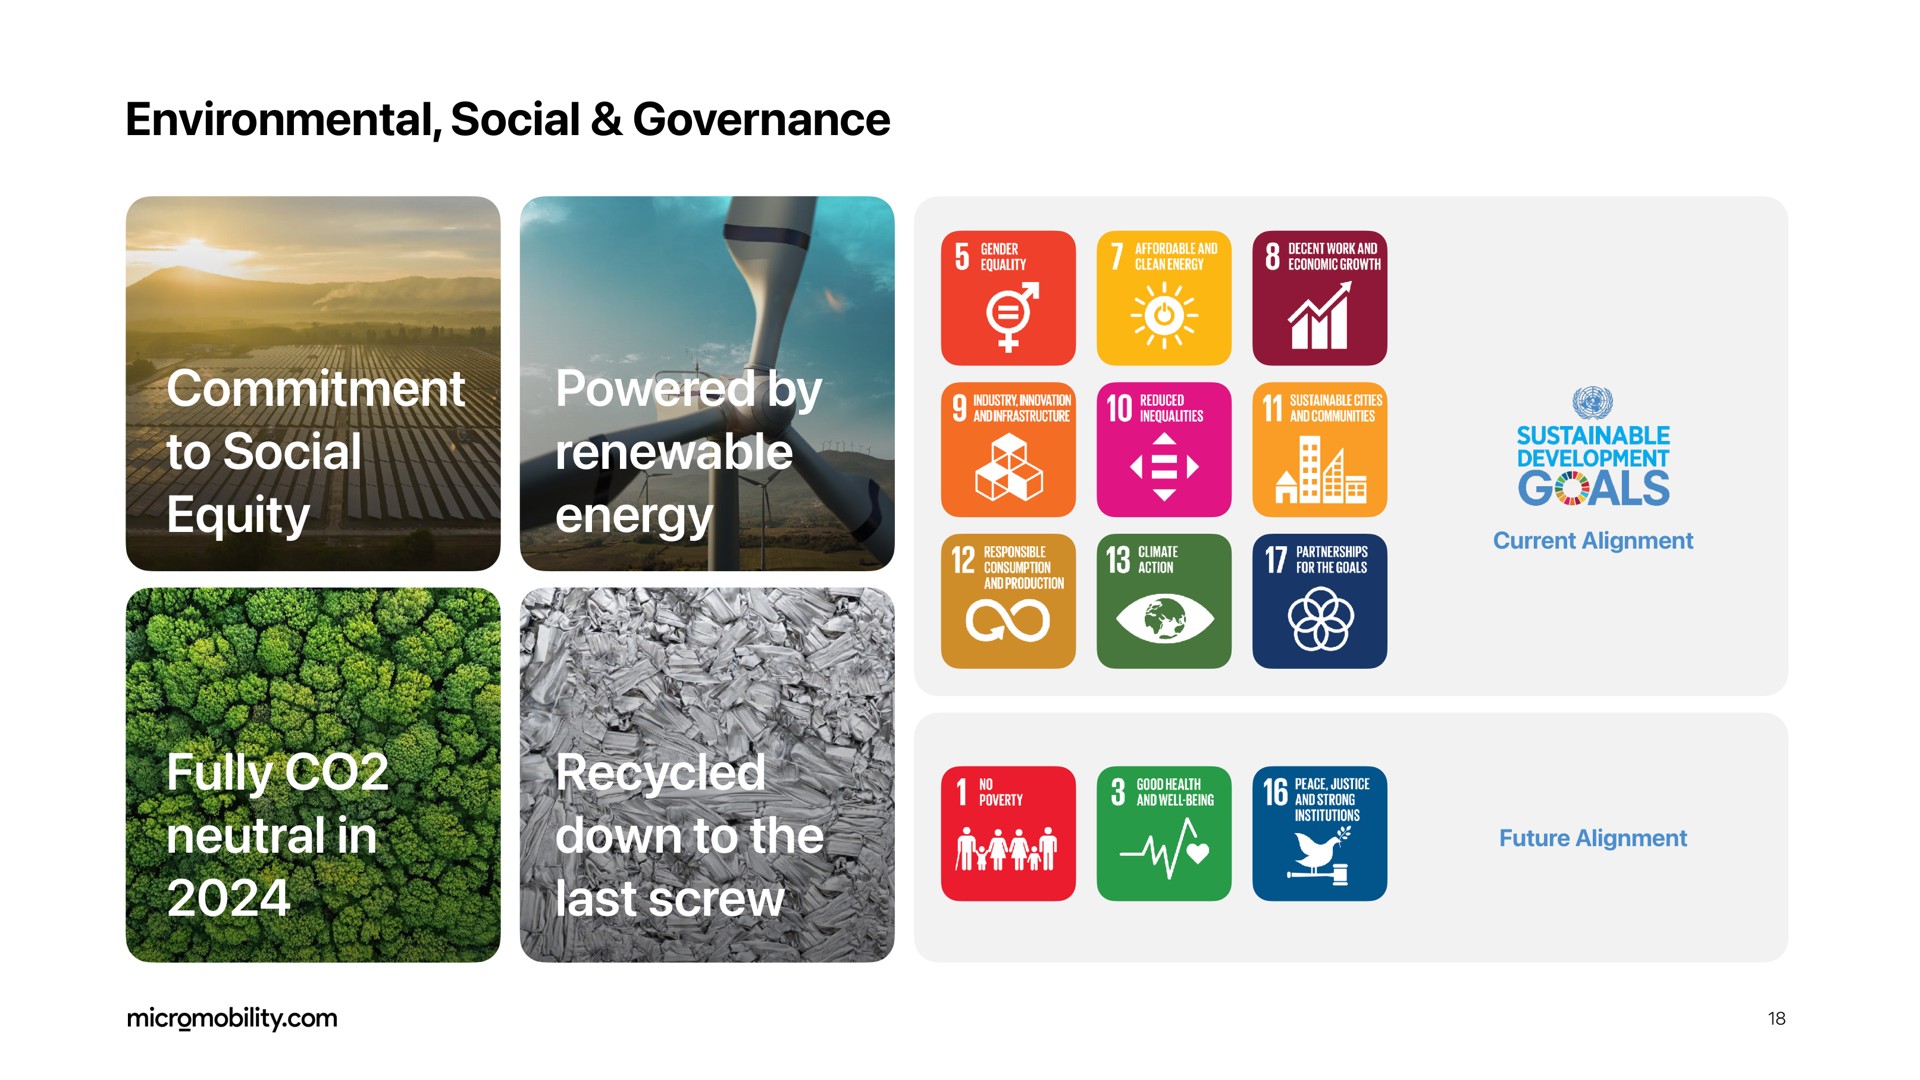 environmental social governance commitment to social equity powered by renewable energy fully neutral in recycled down to the last screw oats cree one col ges at | Helbiz